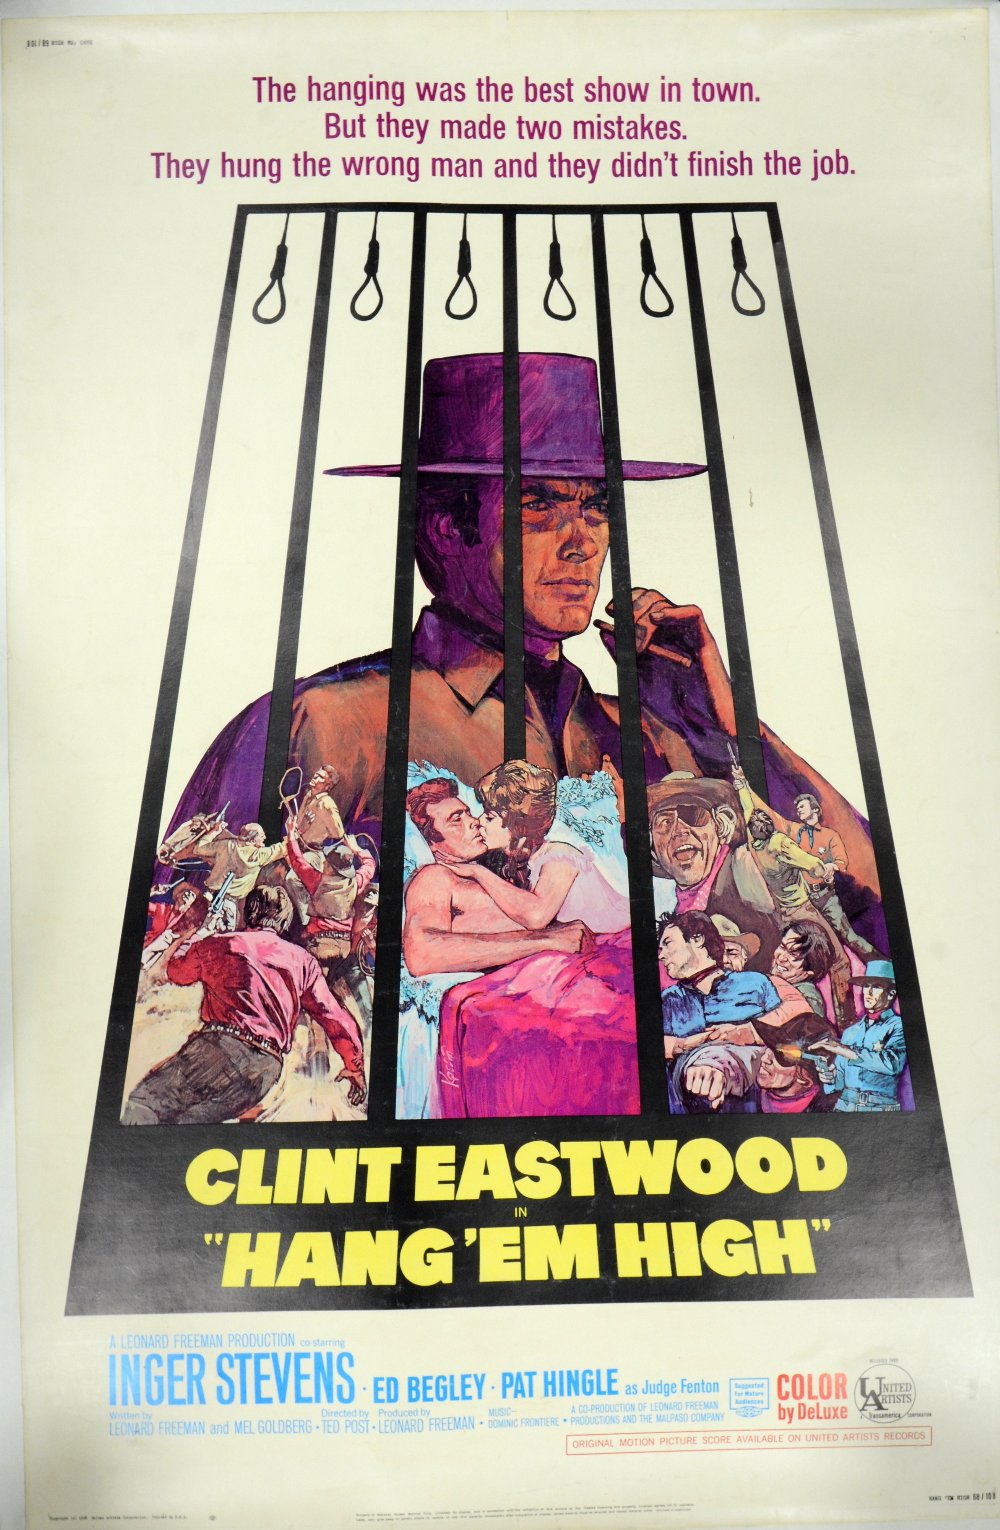 Hang 'Em High (1968) 40 x 60 film poster, western starring Clint Eastwood, United Artists, linen - Image 3 of 4